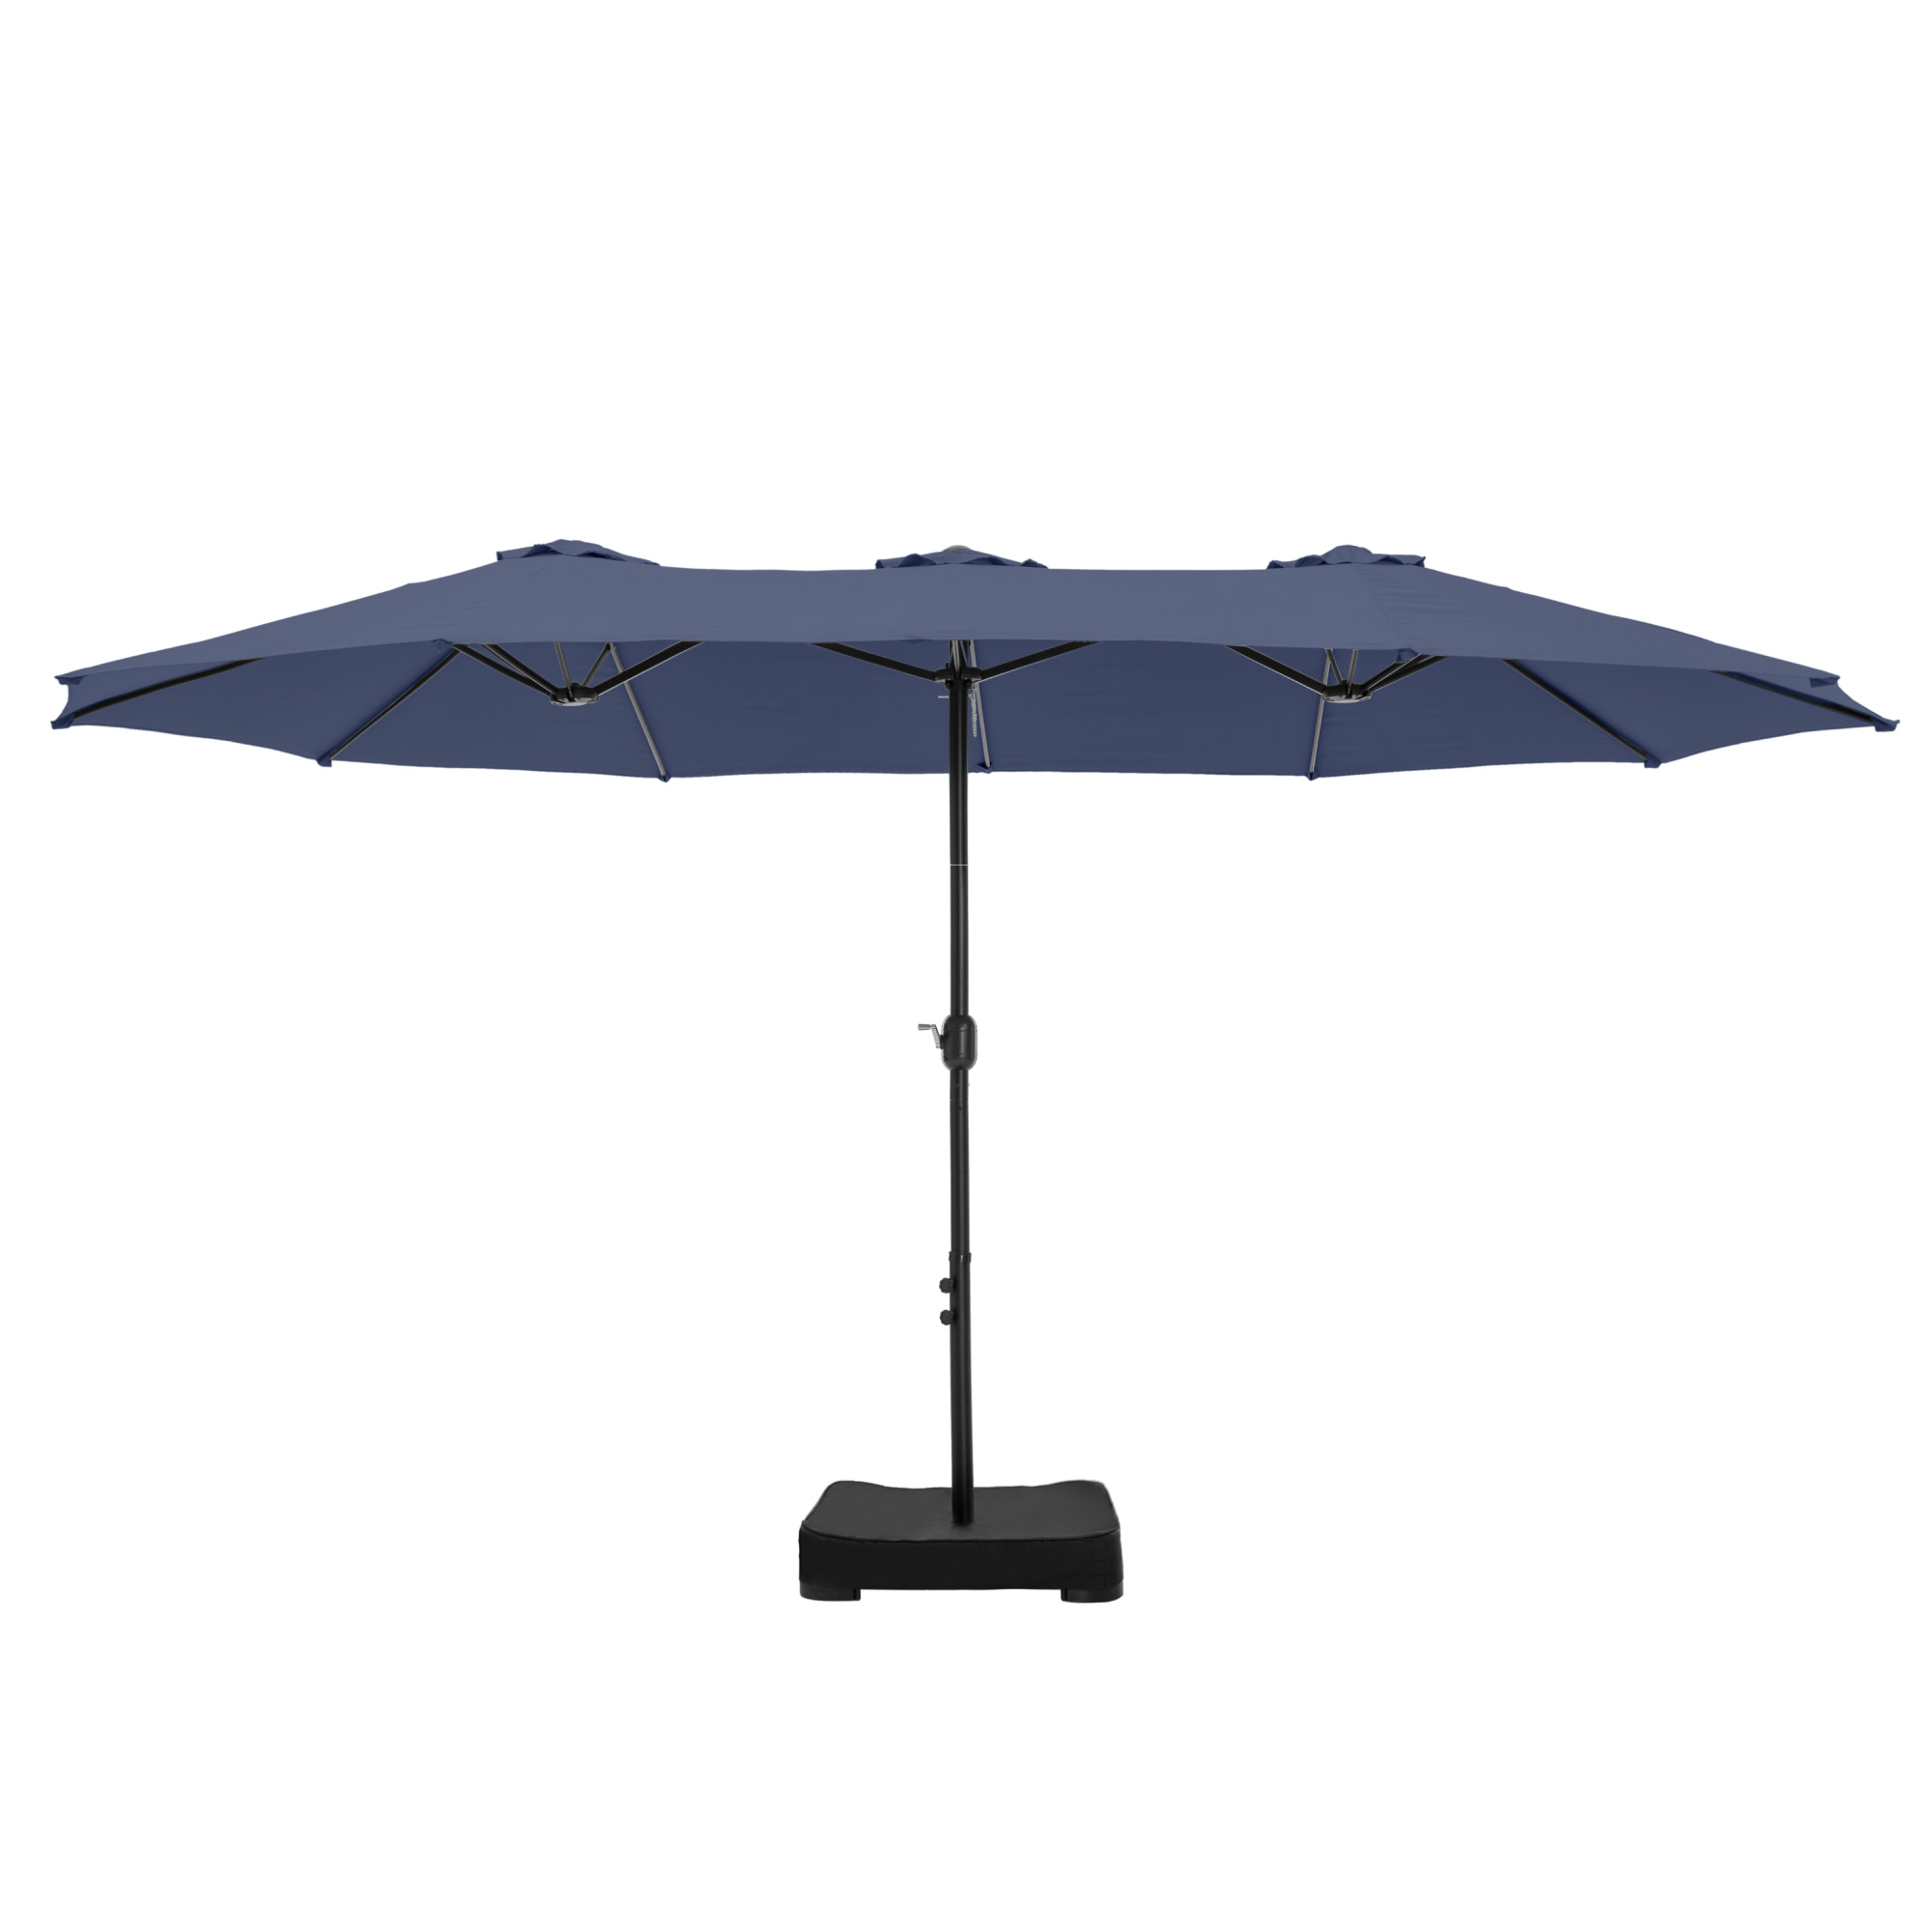 Summit Living 15 FT  Double-Sided Patio Umbrella with Base Large Outdoor Table Umbrella Navy Blue - image 4 of 11